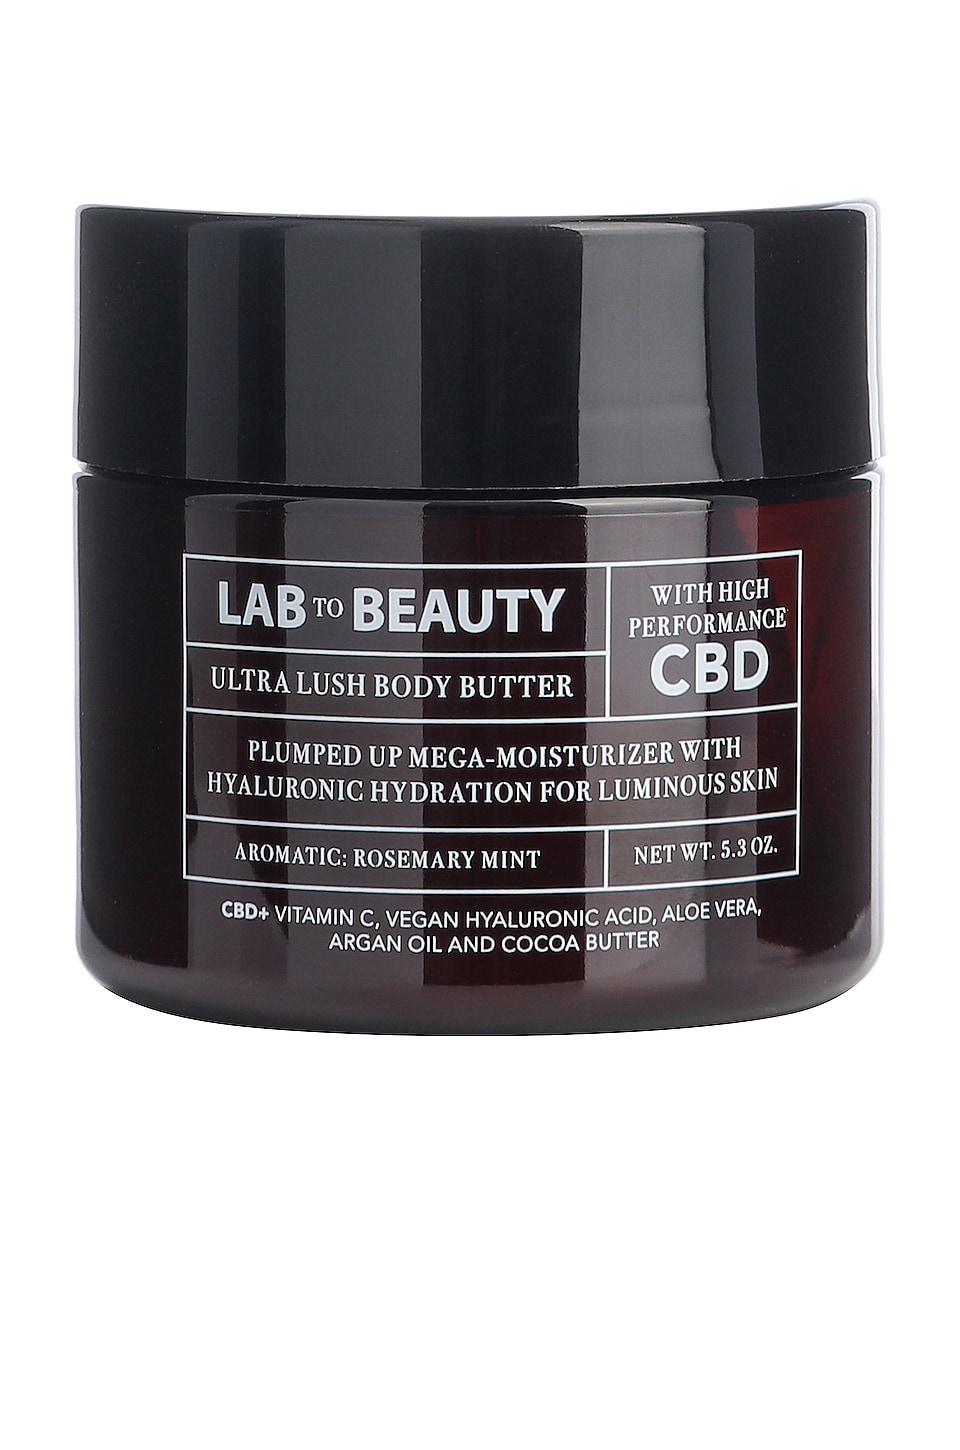 LAB TO BEAUTY THE ULTRA LUSH BODY BUTTER,LABR-WU10